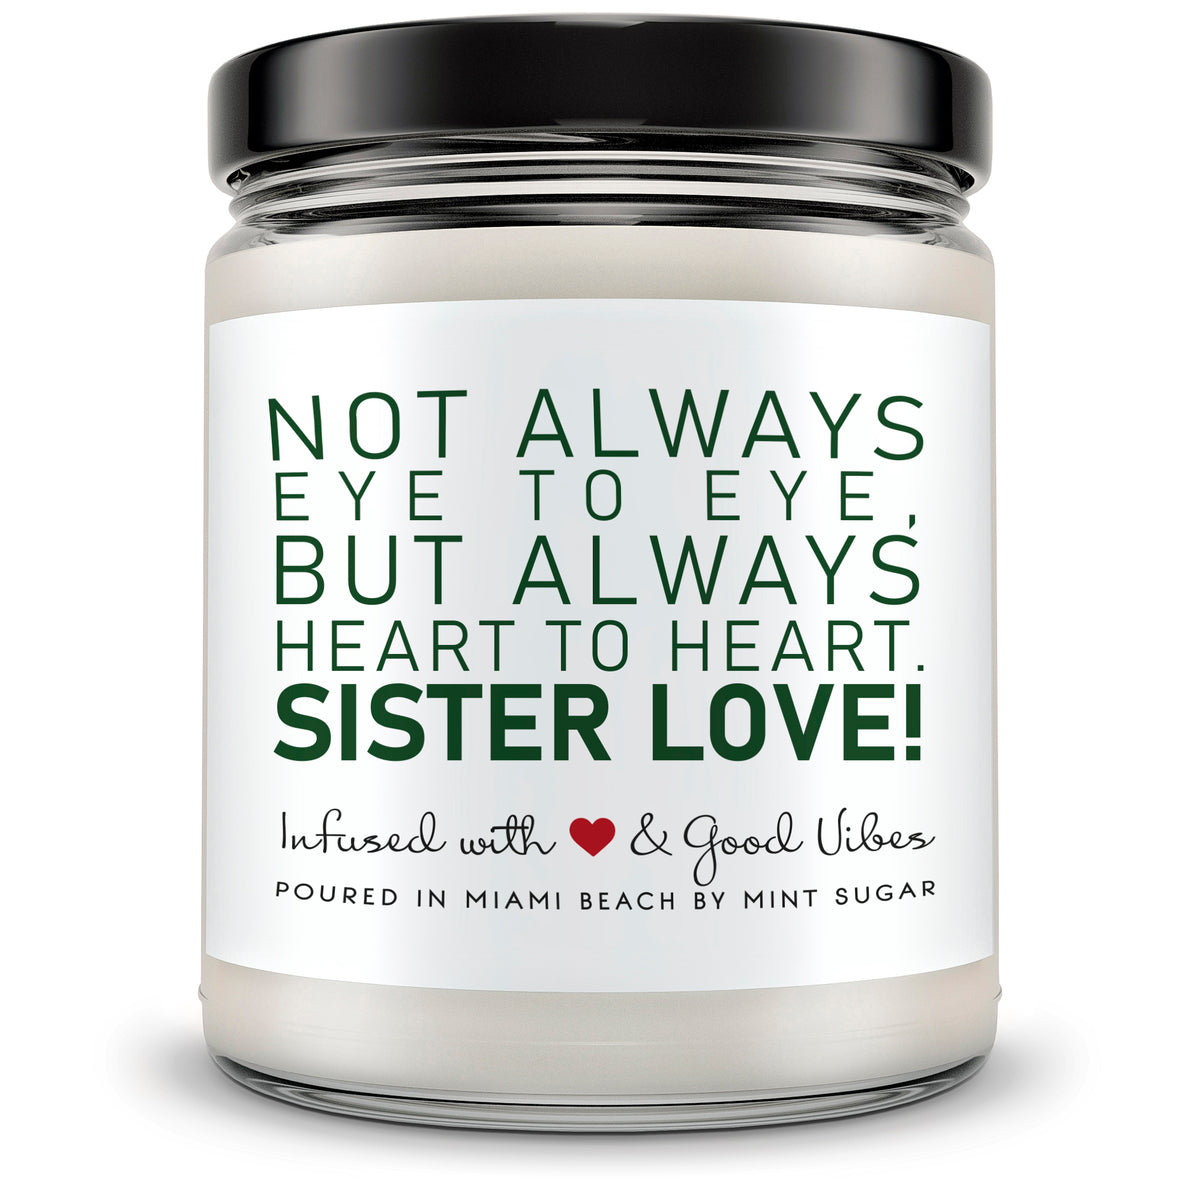 Not Always Eye to Eye, But Always Heart to Heart. Sister Love - Mint Sugar Candle